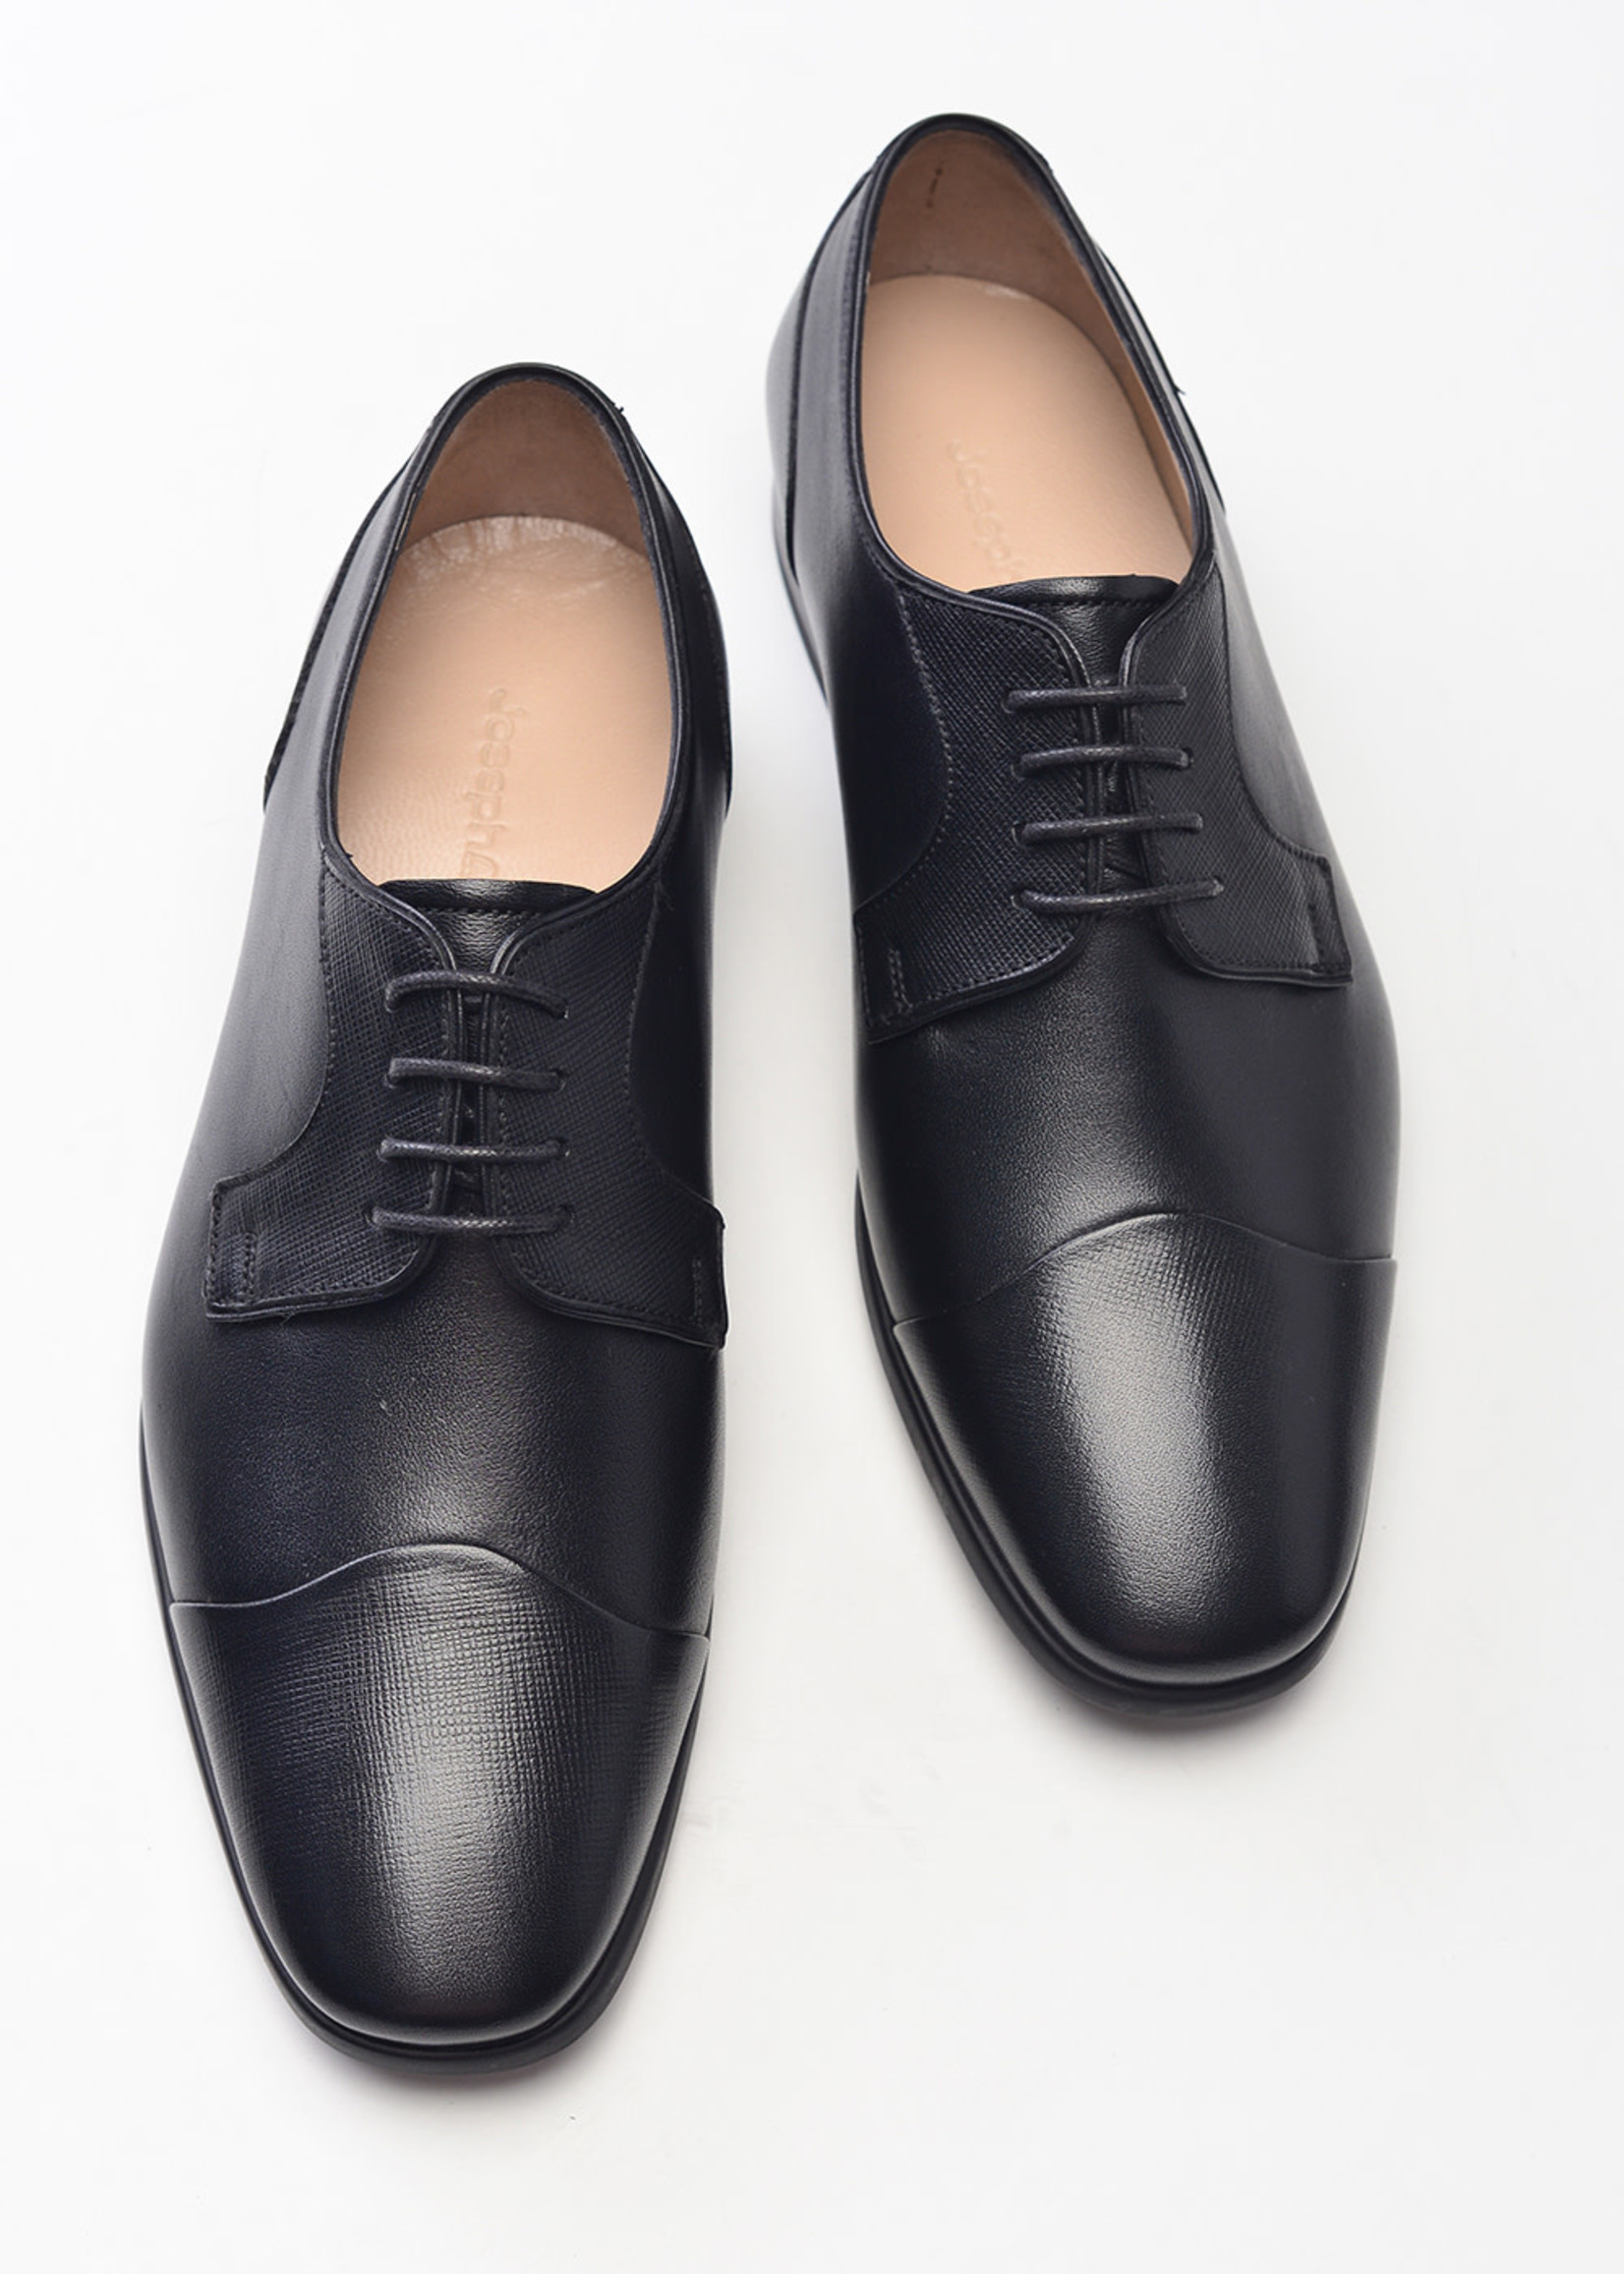 Leather wavy Cap Toe Derby Dress Shoe With Smooth Napa rubber sole tie shoe